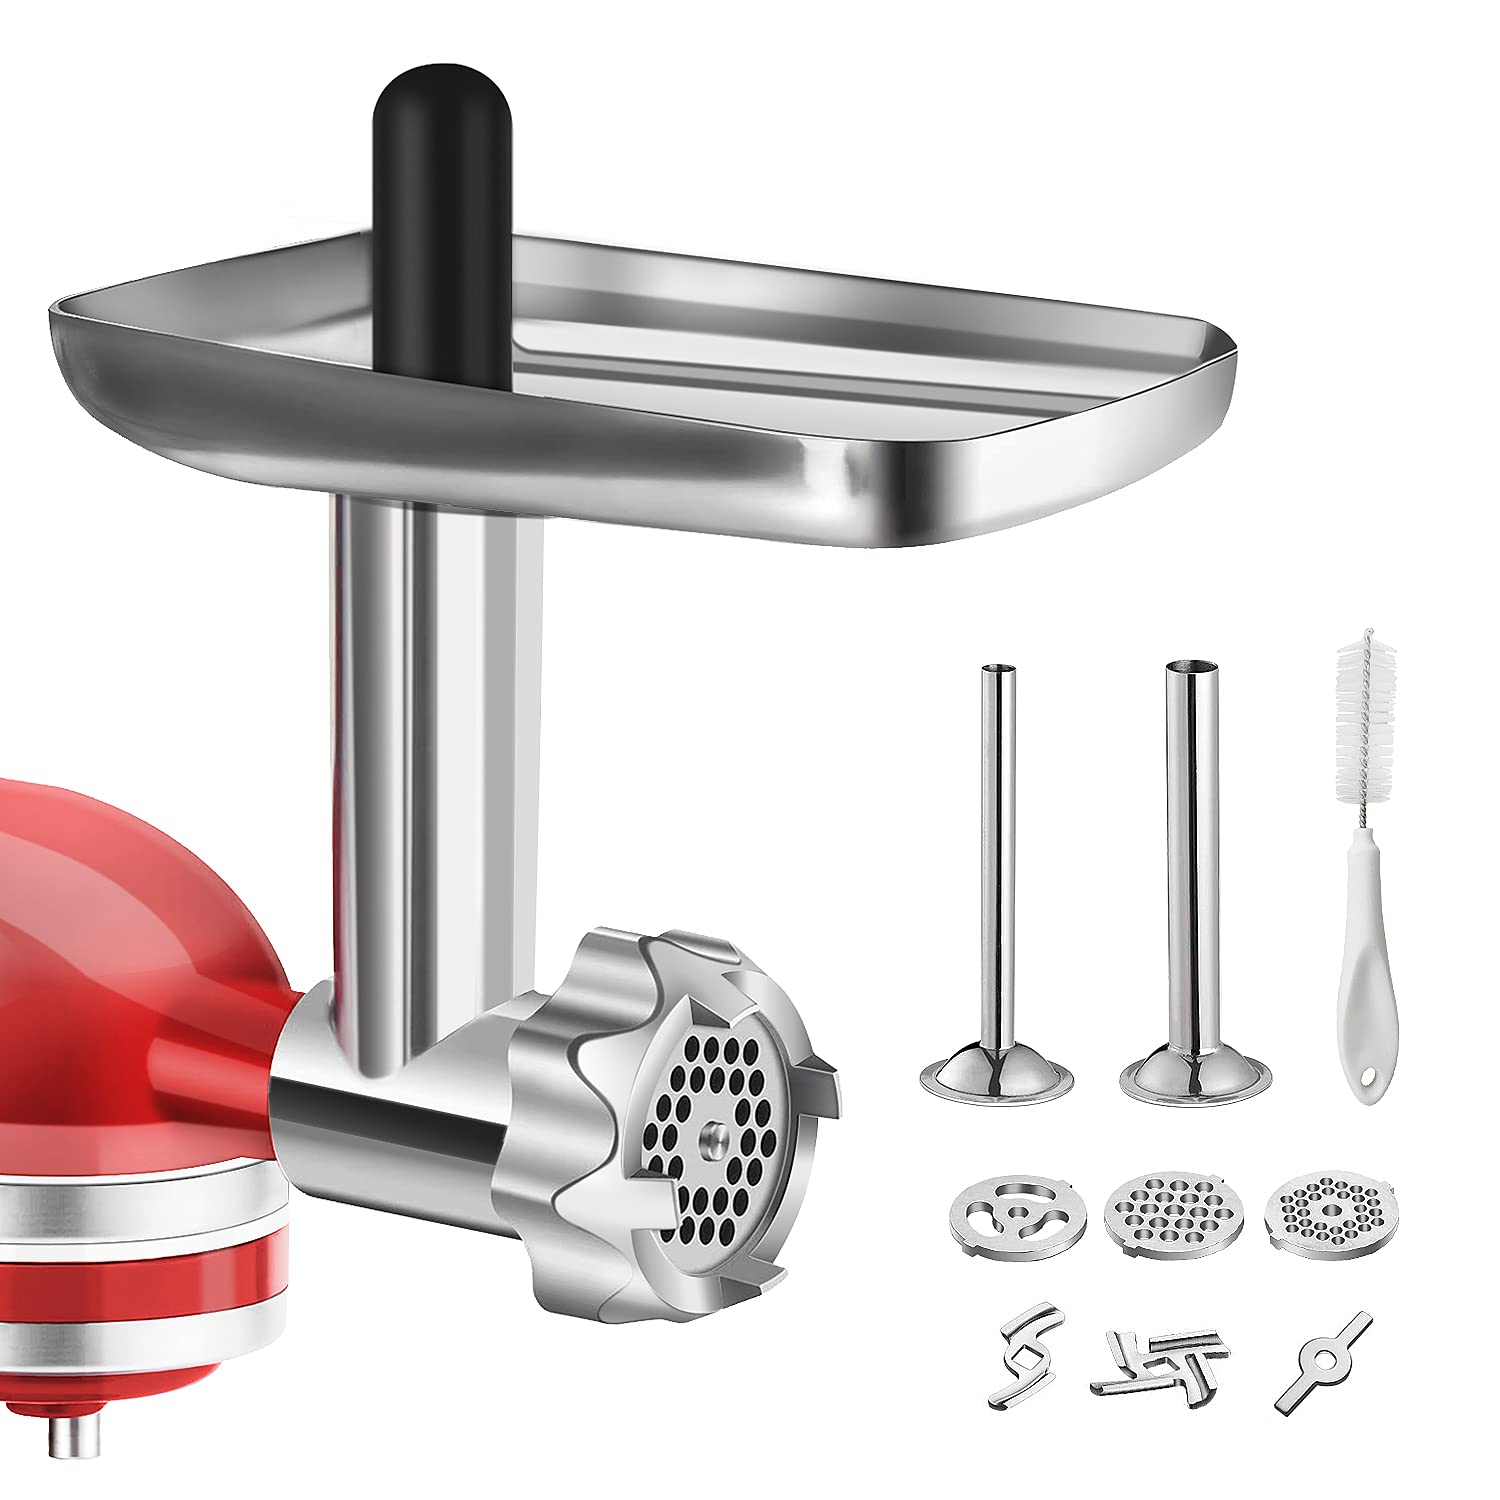 Metal Food Grinder Attachment for KitchenAid Stand Mixers, BQYPOWER Meat Grinder Attachment Included 2 Sausage Stuffer Tubes, 3 Grinding Blades, 3 Grinding Plates